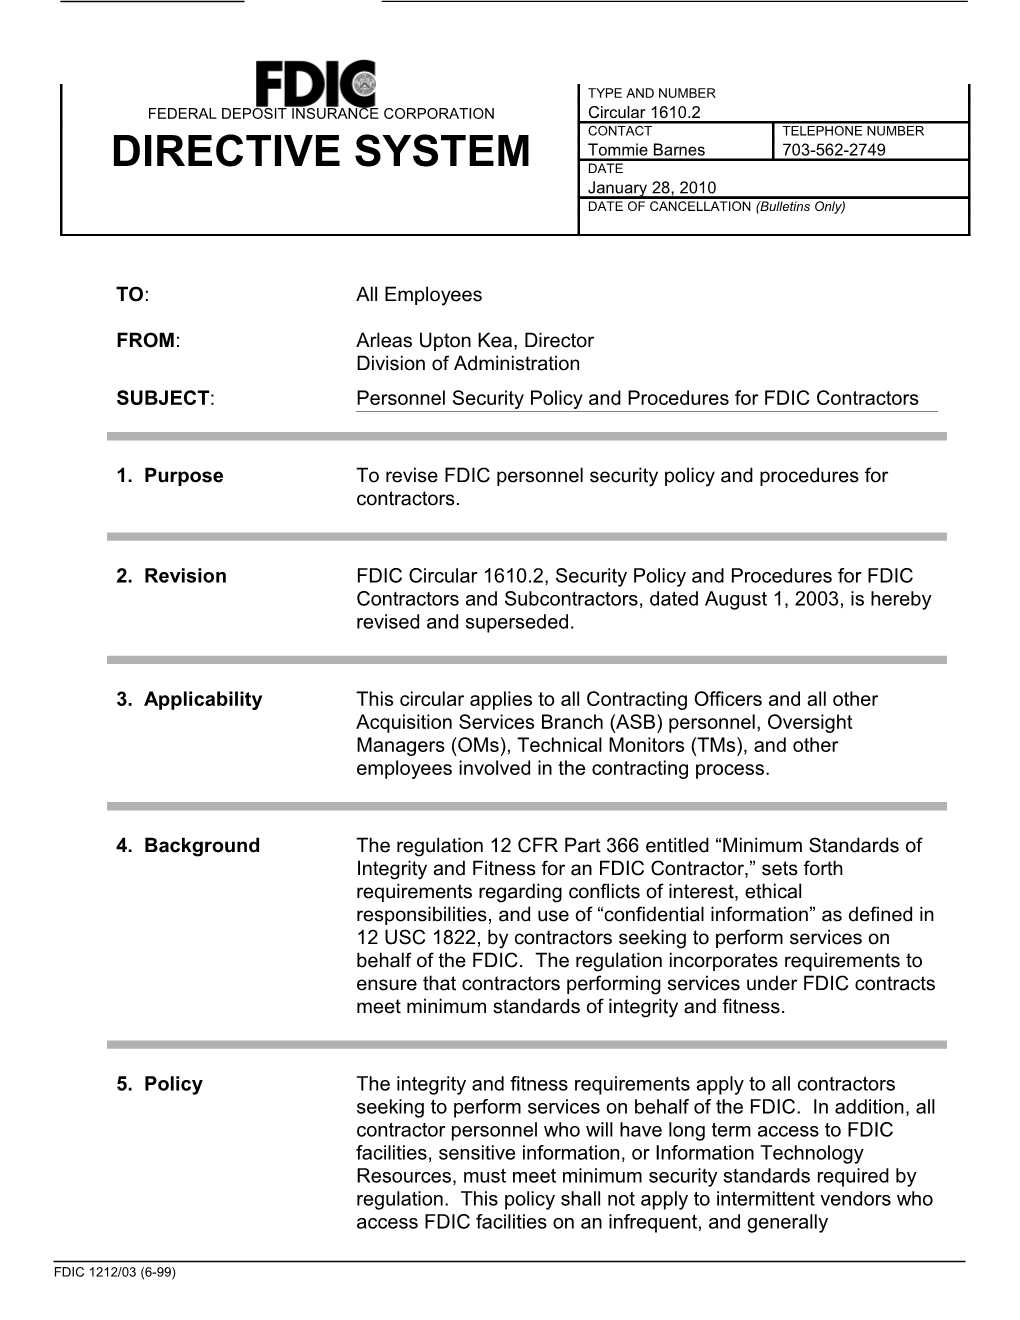 Circular 1610.2, Personnel Security Policy And Procedures For FDIC Contractors